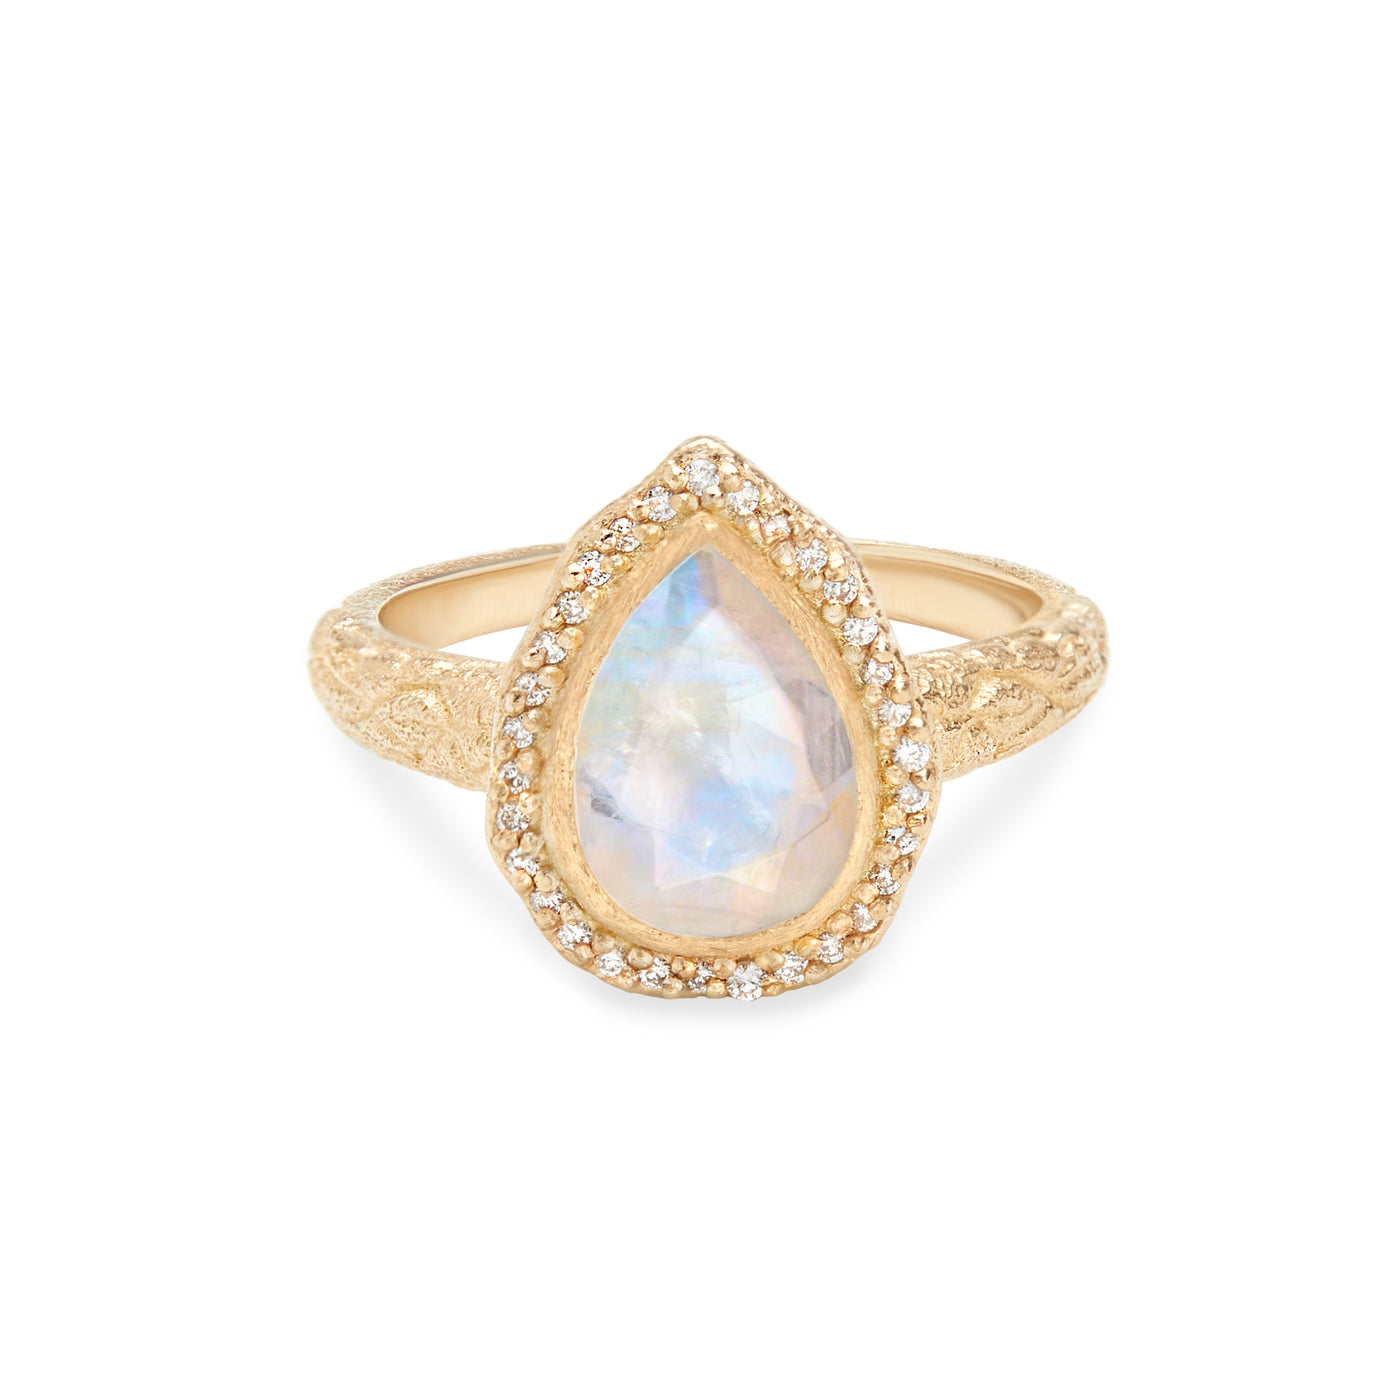 14 Karat Yellow Gold Ring with Pear Shaped Moonstone with Halo of White Diamonds Against White Background